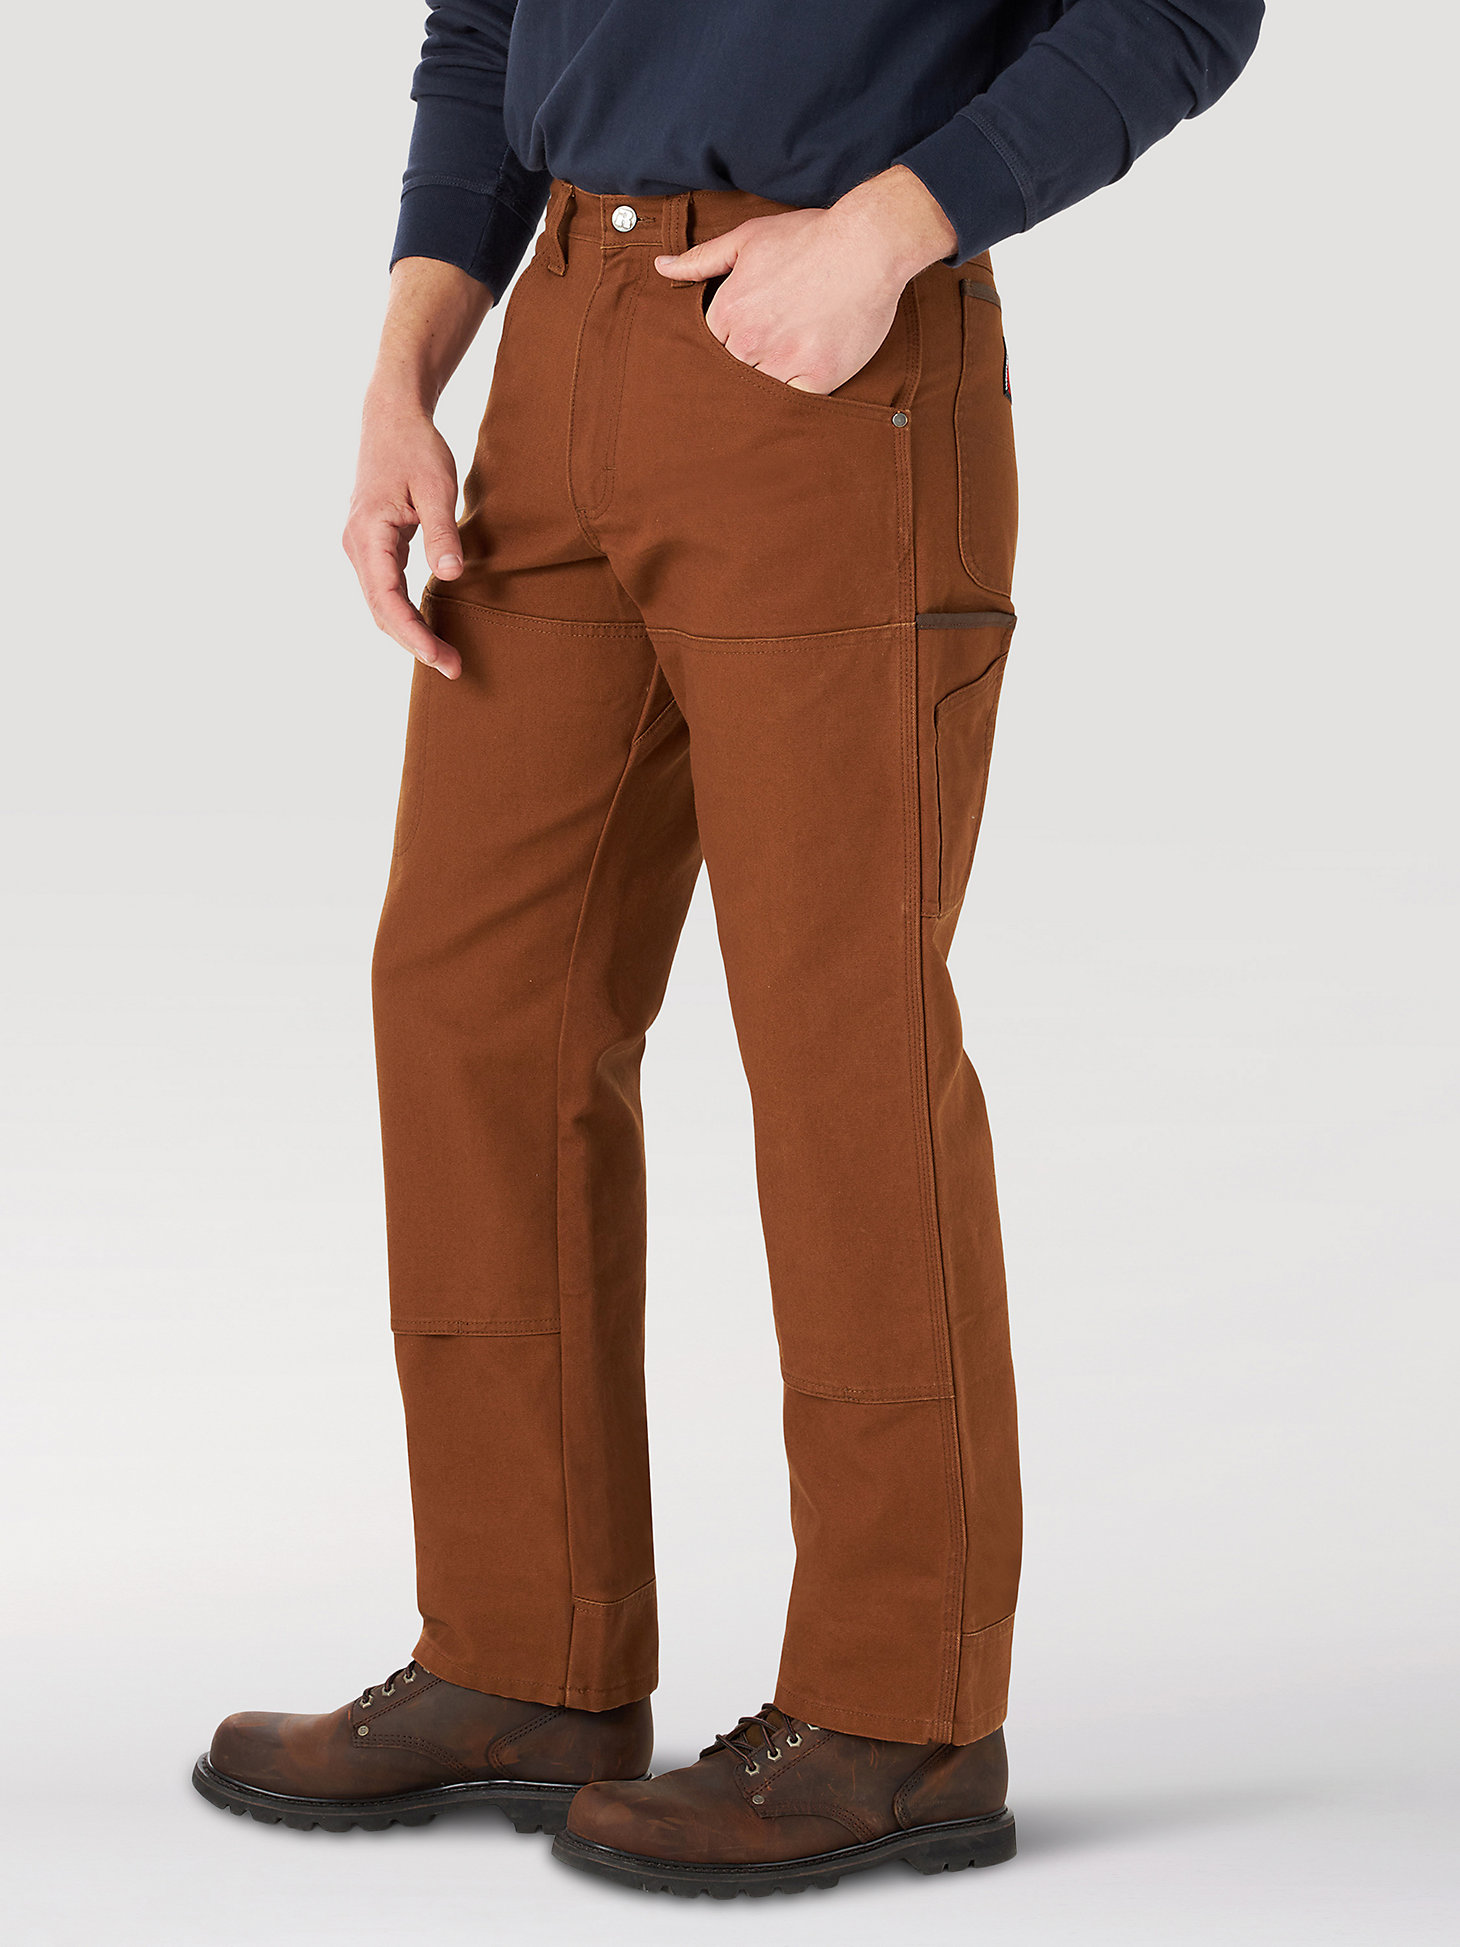 Wrangler® RIGGS Workwear® Mason Relaxed Fit Canvas Pant in Toffee Brown main view